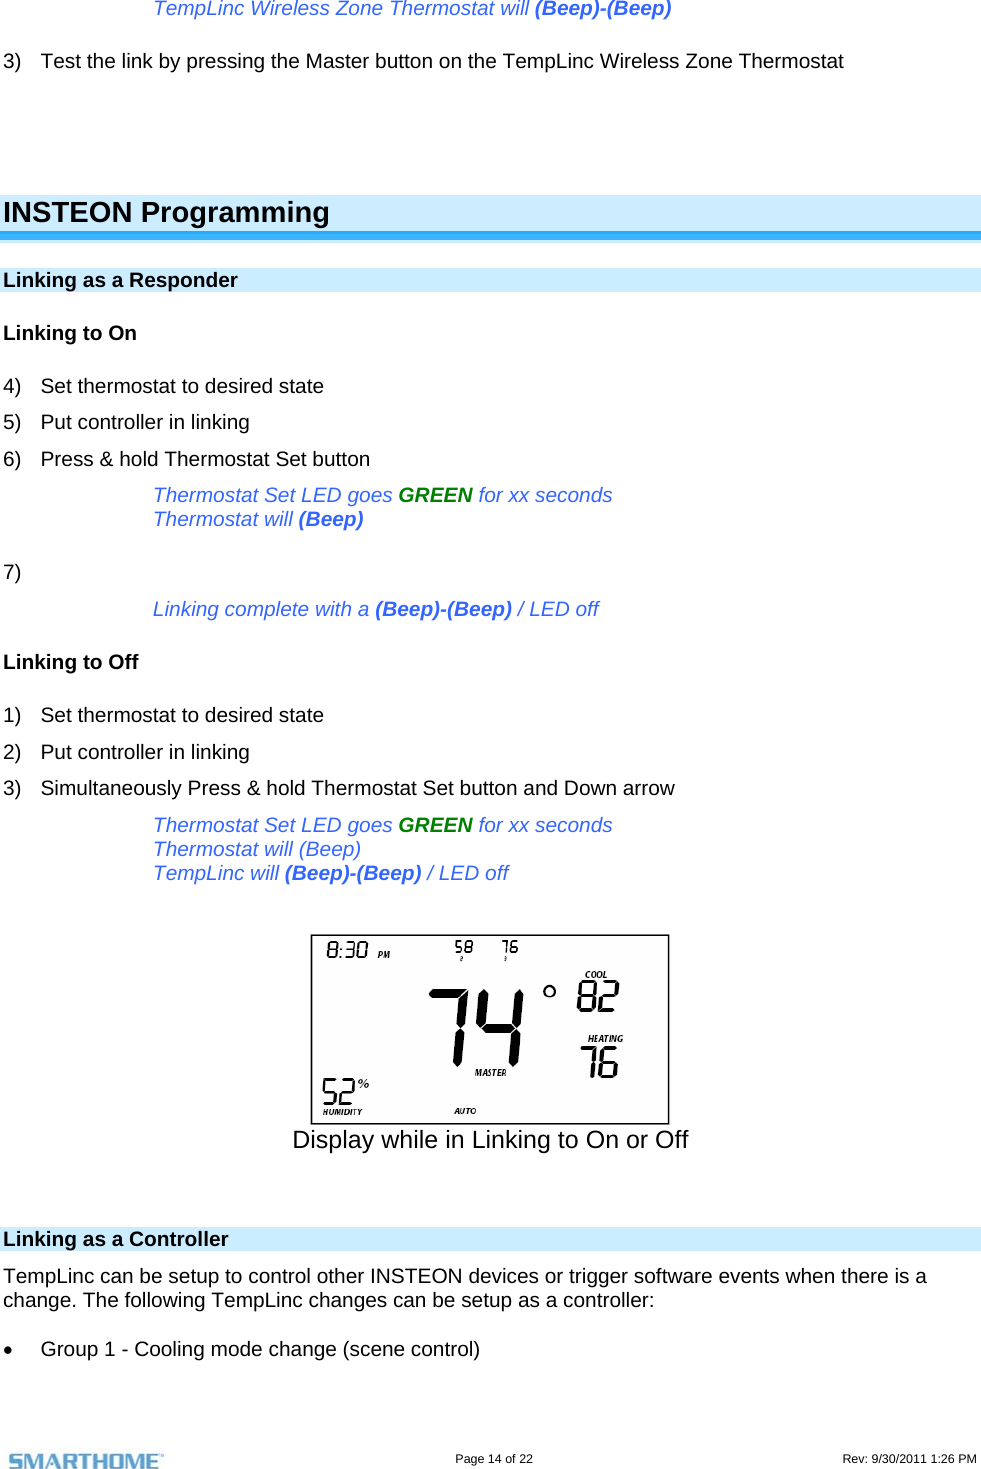                                                                                                                                   Page 14 of 22                                                                                         Rev: 9/30/2011 1:26 PM TempLinc Wireless Zone Thermostat will (Beep)-(Beep) 3)  Test the link by pressing the Master button on the TempLinc Wireless Zone Thermostat    INSTEON Programming Linking as a Responder Linking to On 4)  Set thermostat to desired state 5)  Put controller in linking 6)  Press &amp; hold Thermostat Set button Thermostat Set LED goes GREEN for xx seconds Thermostat will (Beep) 7)  Linking complete with a (Beep)-(Beep) / LED off Linking to Off 1)  Set thermostat to desired state 2)  Put controller in linking 3)  Simultaneously Press &amp; hold Thermostat Set button and Down arrow Thermostat Set LED goes GREEN for xx seconds Thermostat will (Beep) TempLinc will (Beep)-(Beep) / LED off    Display while in Linking to On or Off   Linking as a Controller TempLinc can be setup to control other INSTEON devices or trigger software events when there is a change. The following TempLinc changes can be setup as a controller:     Group 1 - Cooling mode change (scene control) 